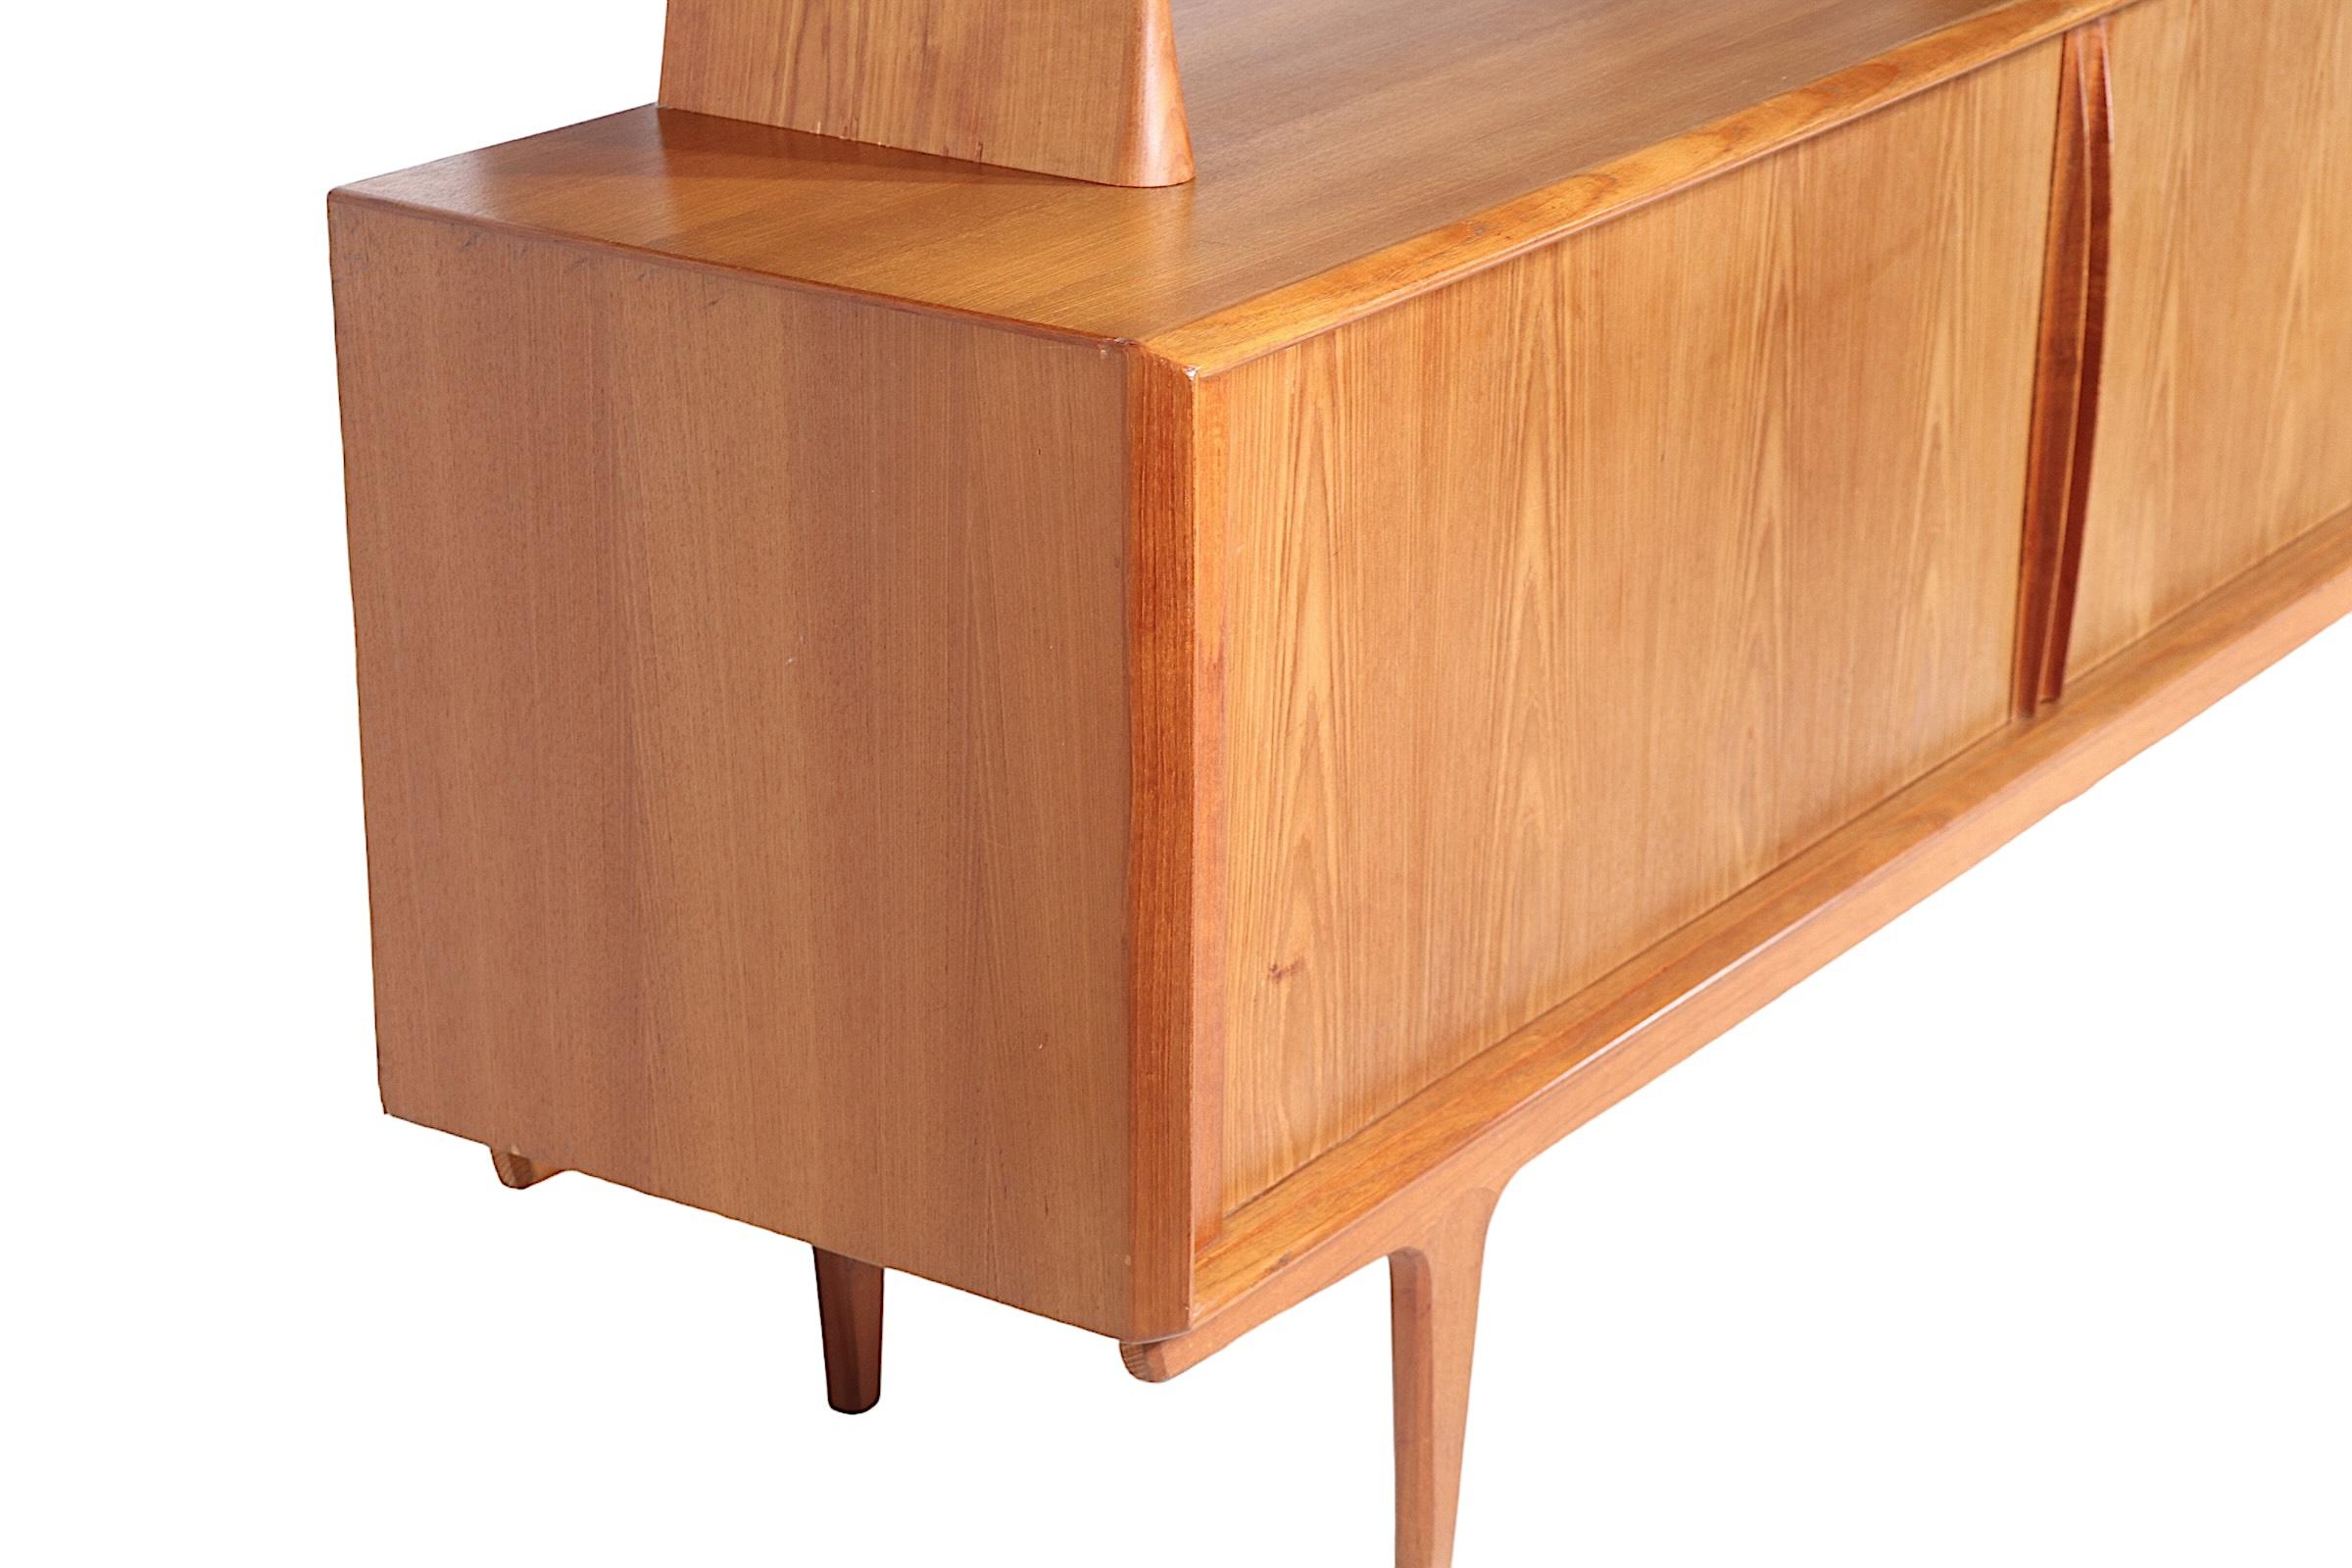 Exceptional Danish Mid Century Modern showcase sideboard, credenza, made in Denmark by Bernard Pedersen & Son, circa 1960's. The lowercase features two sliding tambour door, which open to a center bank of four drawers, flanked by open shelved